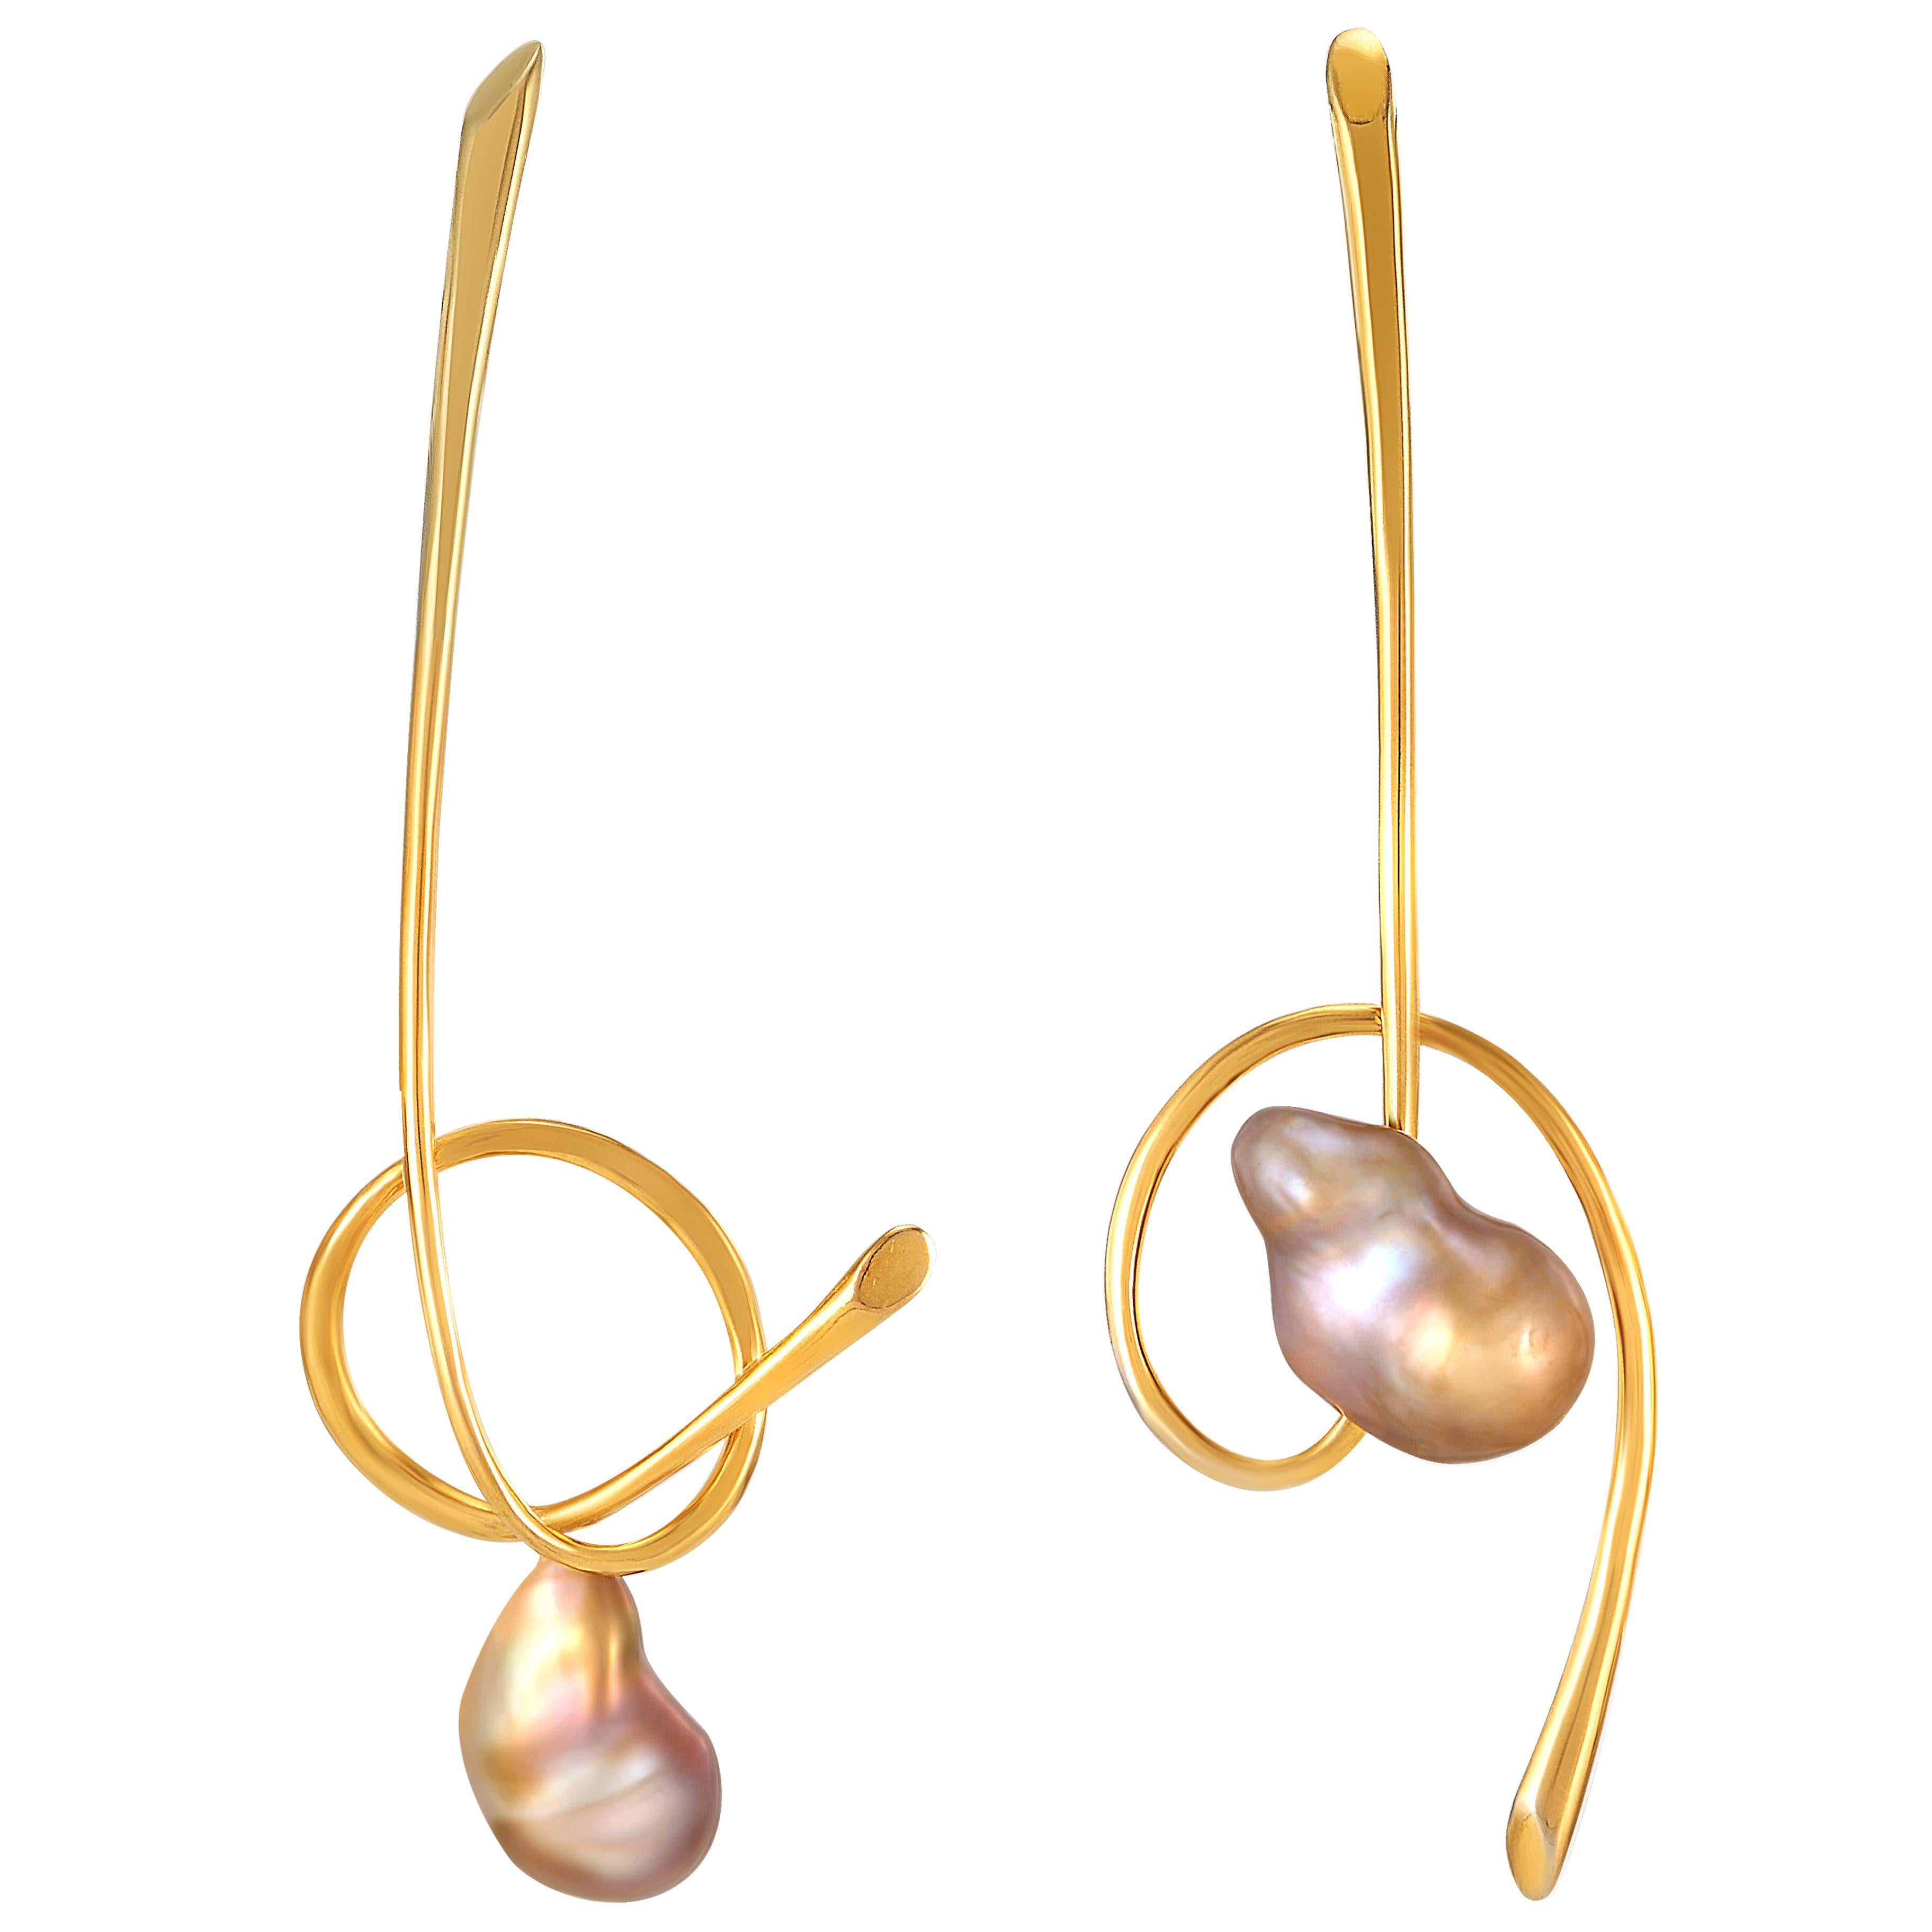 Baroque pearls set in these designed earrings feature dynamic curves with elegance hues. The endless value of this baroque pearl on the earrings she designed, showing an exceptional combination. Unbalance earrings with slightly different shapes on